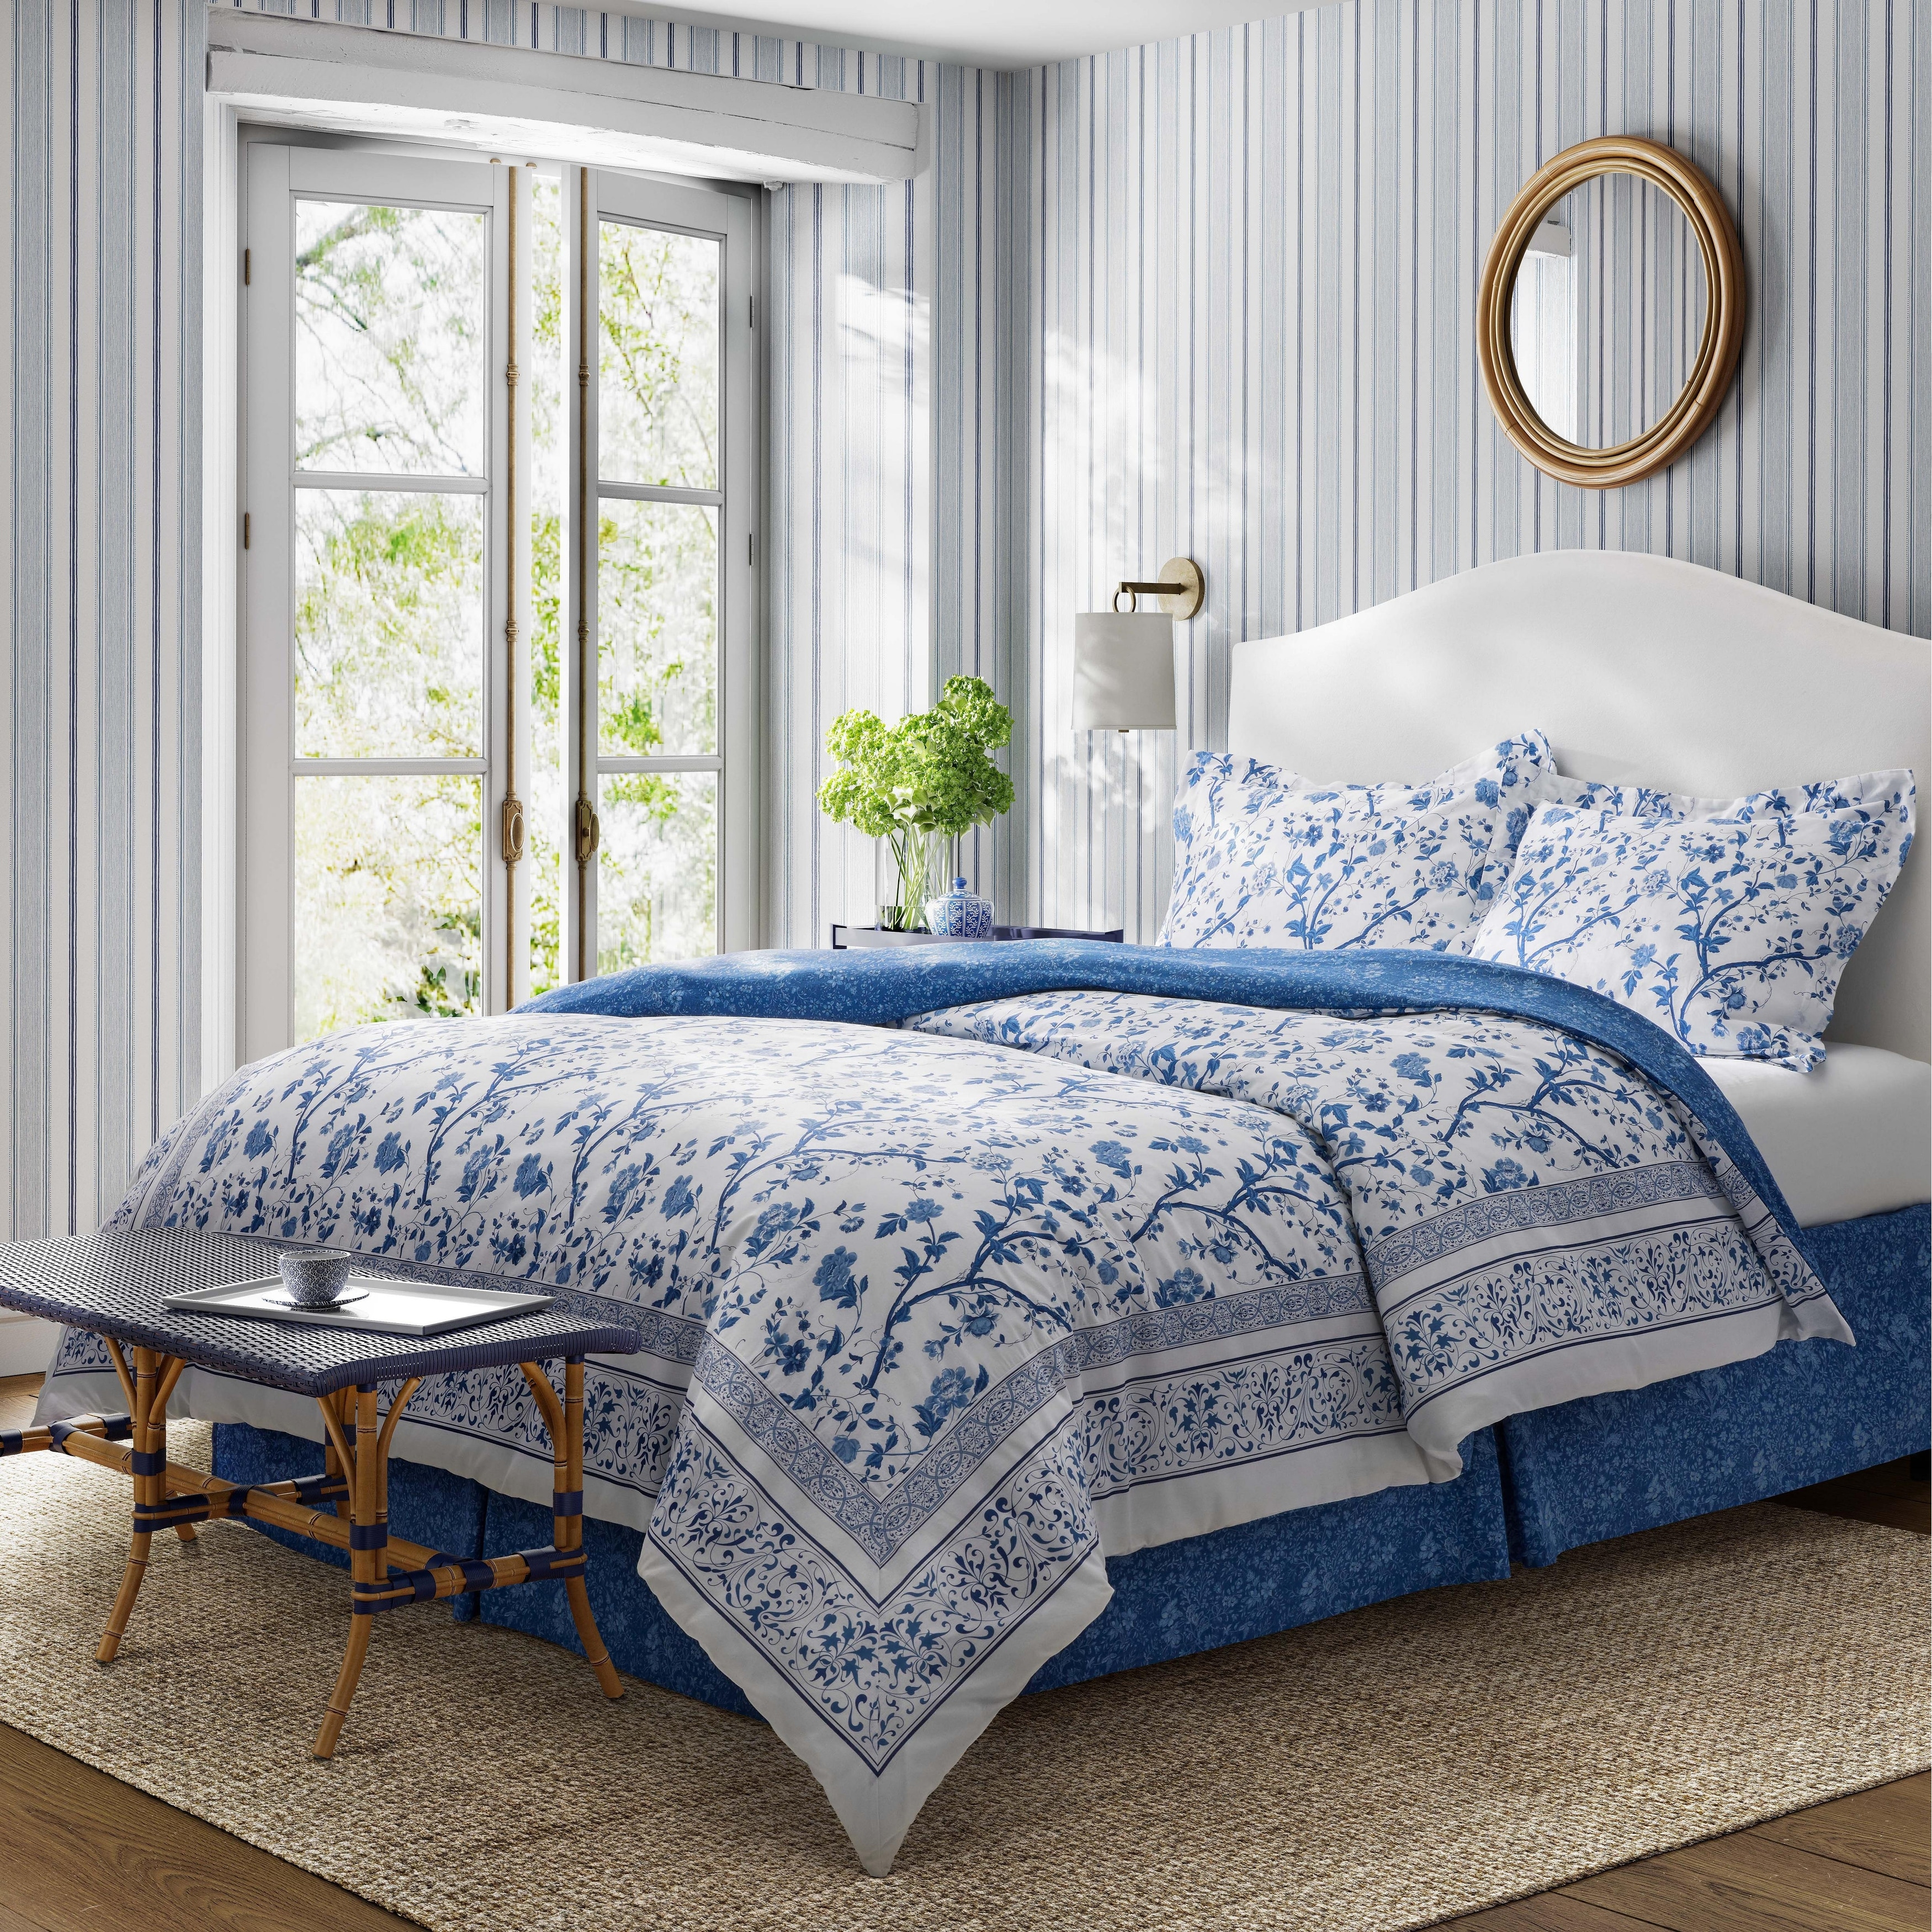 https://ak1.ostkcdn.com/images/products/is/images/direct/b0c15802d011f79034a1bb166fa9daa7f7c20644/Laura-Ashley-Charlotte-Cotton-Reversible-Blue-Comforter-Set.jpg